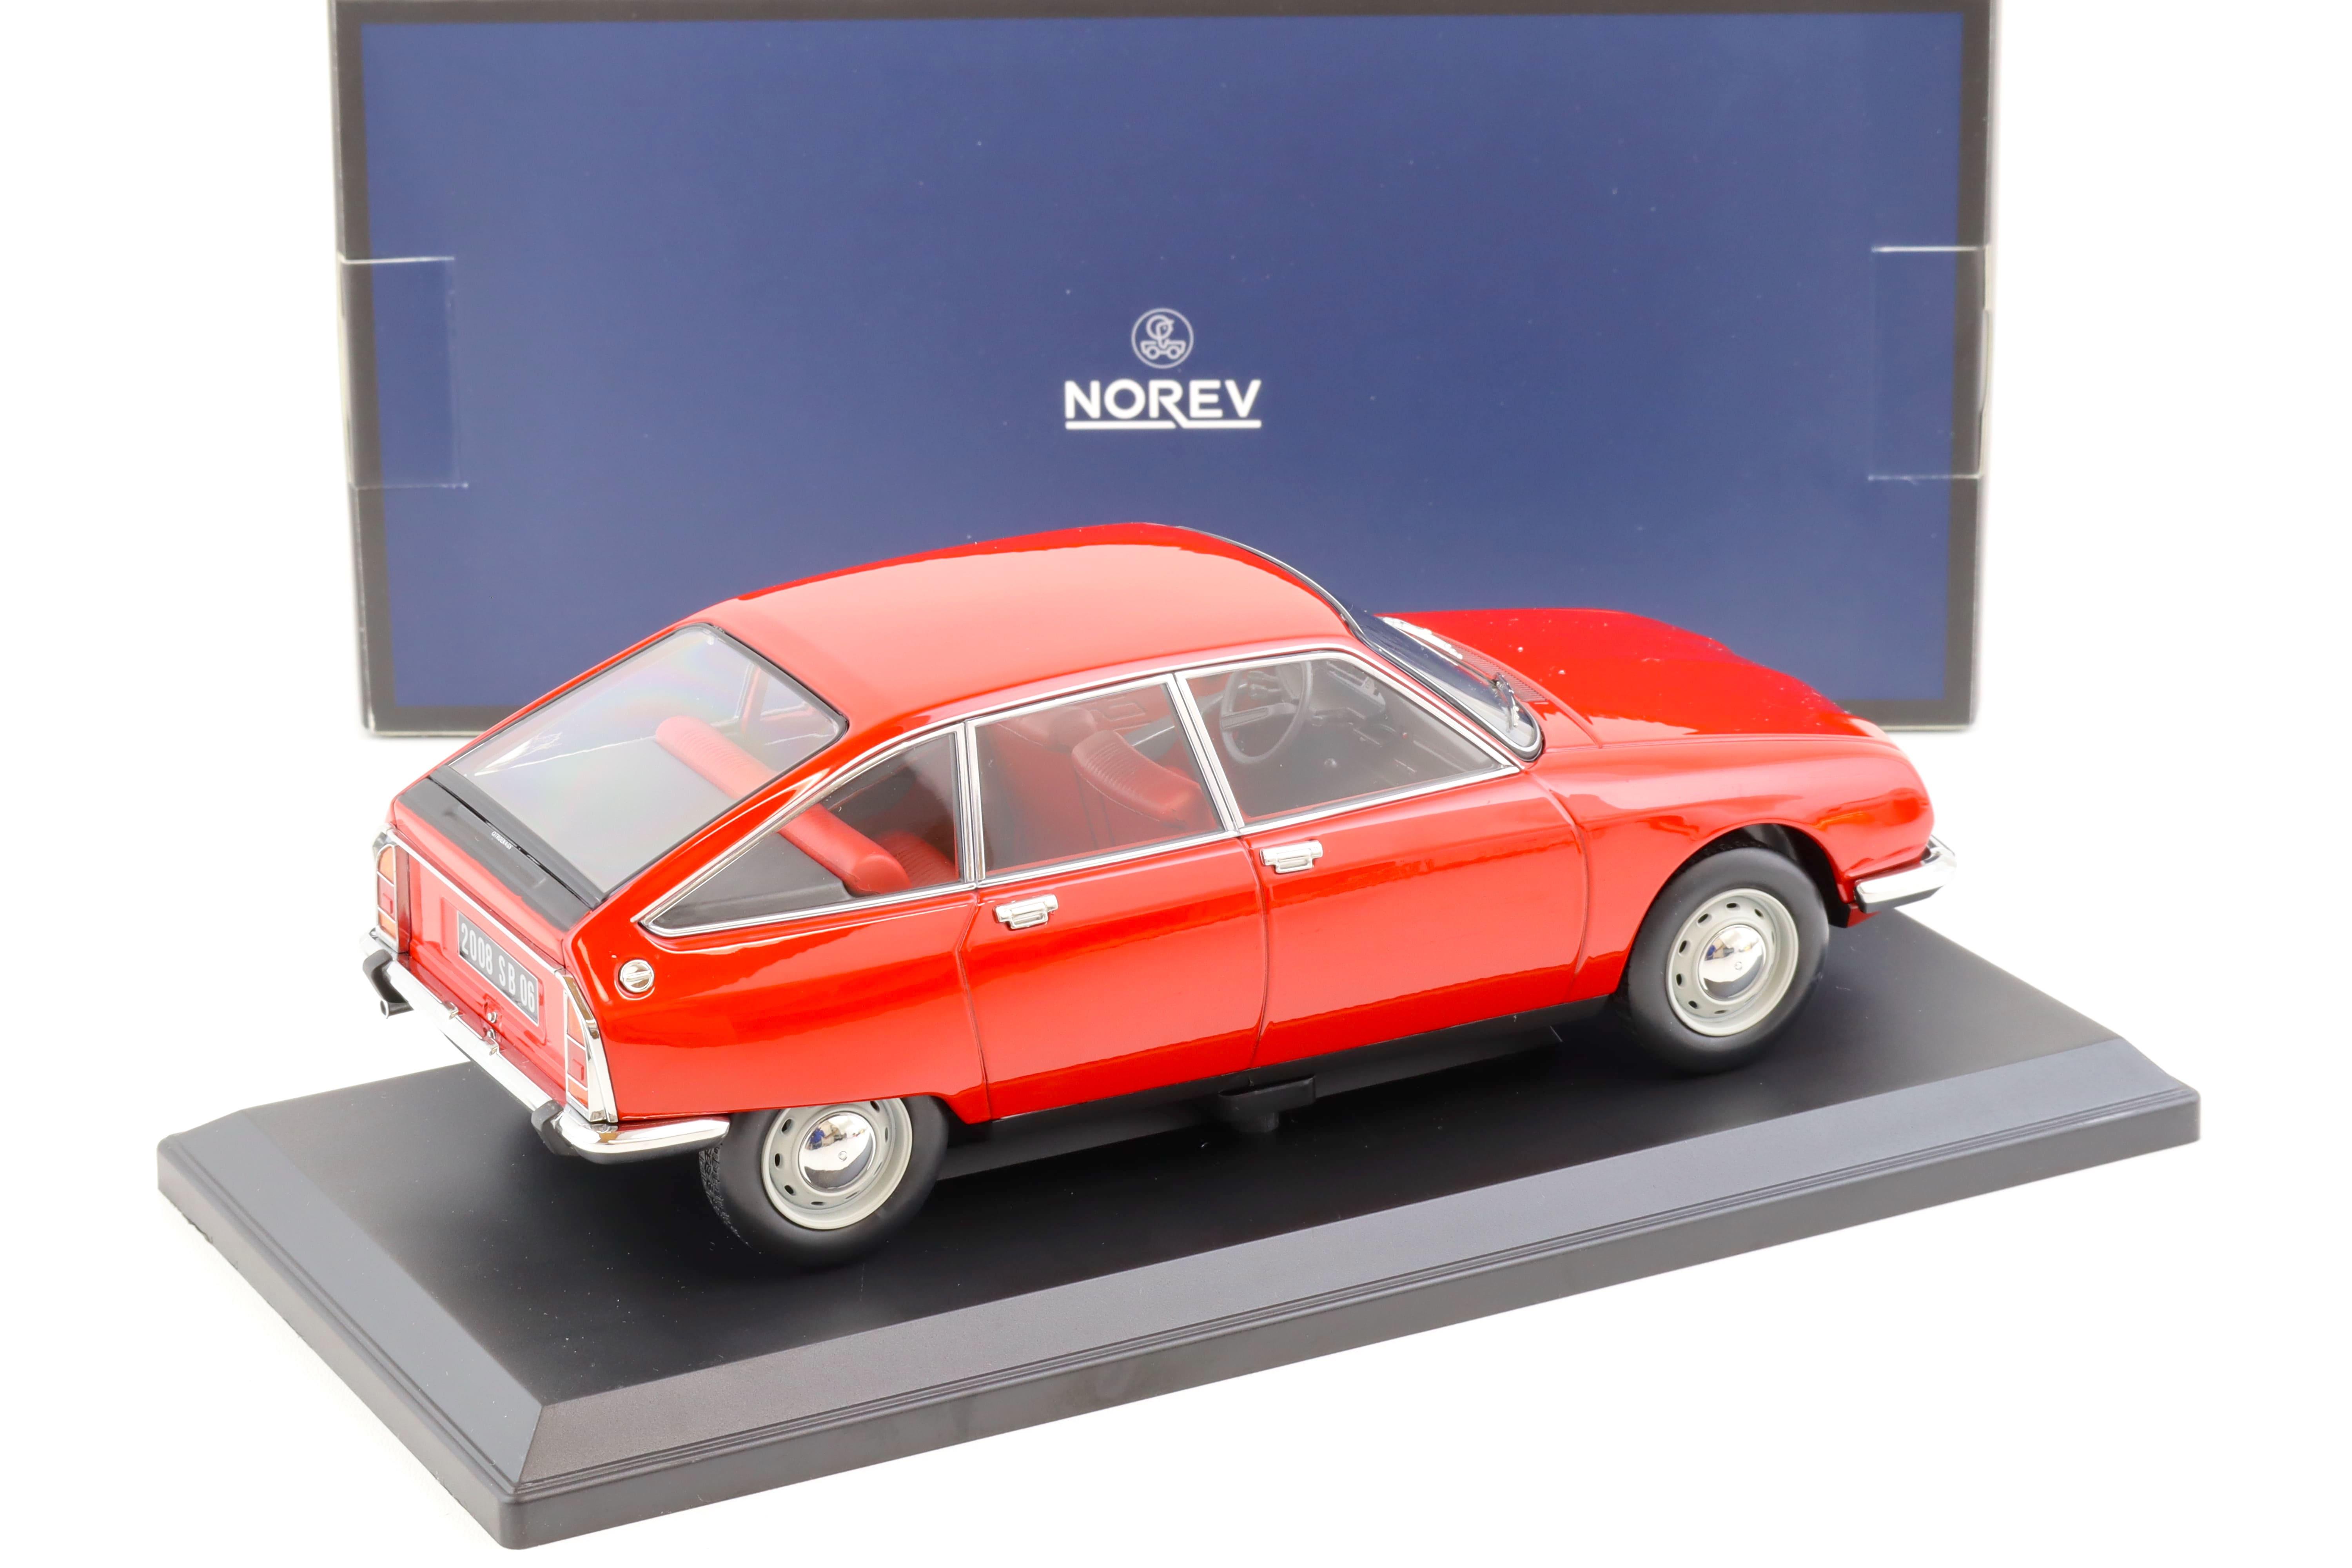 1:18 Norev Citroen GS 1972 Rio red 181668 - Limited Edition 300 pcs.